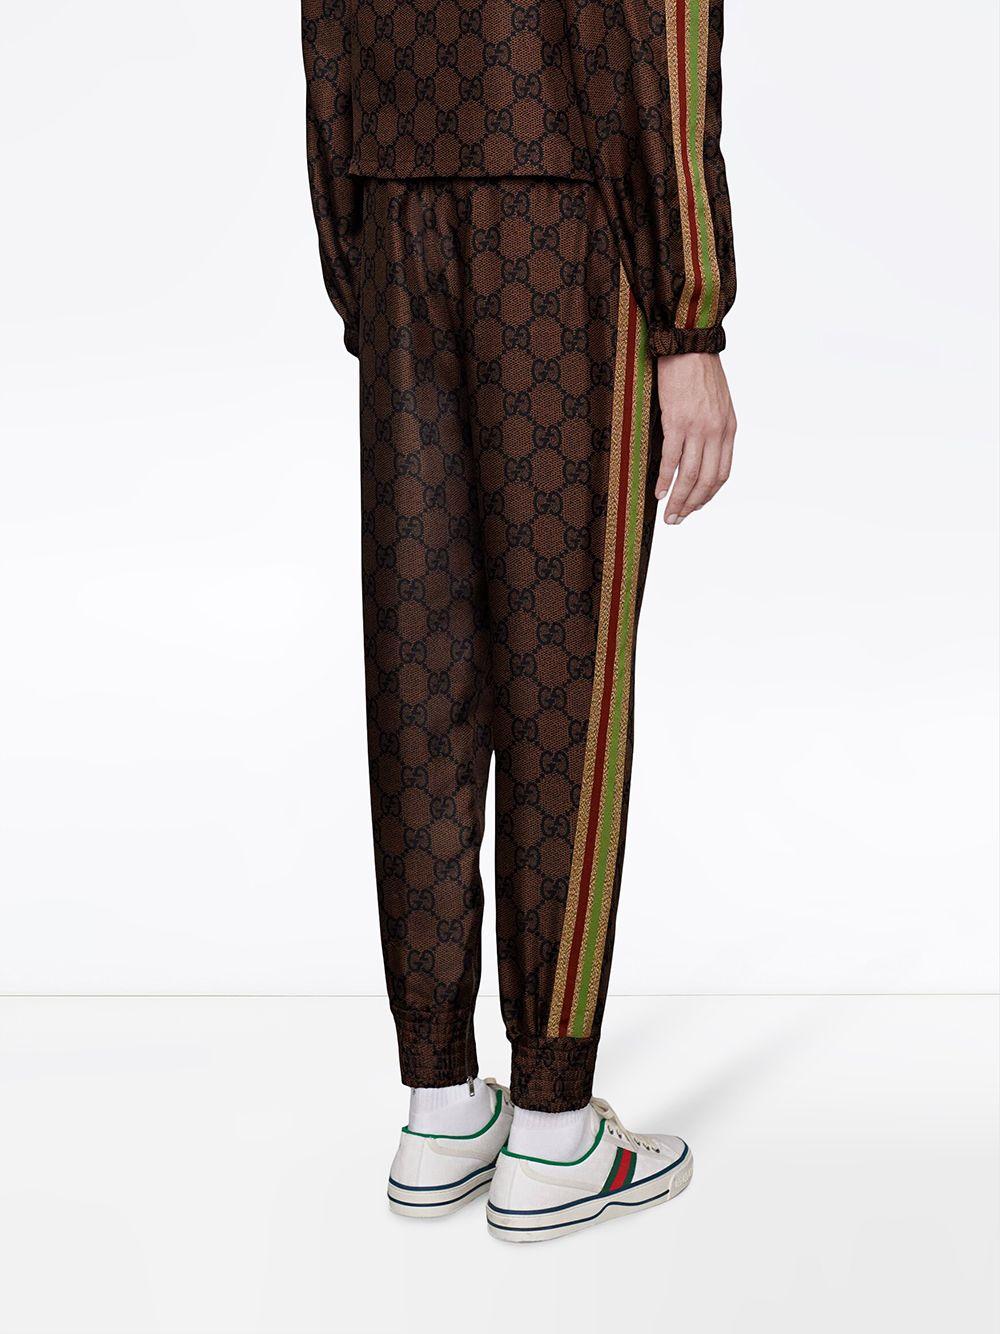 Gucci GG Supreme Print Track Pants in Brown - Save 30% - Lyst